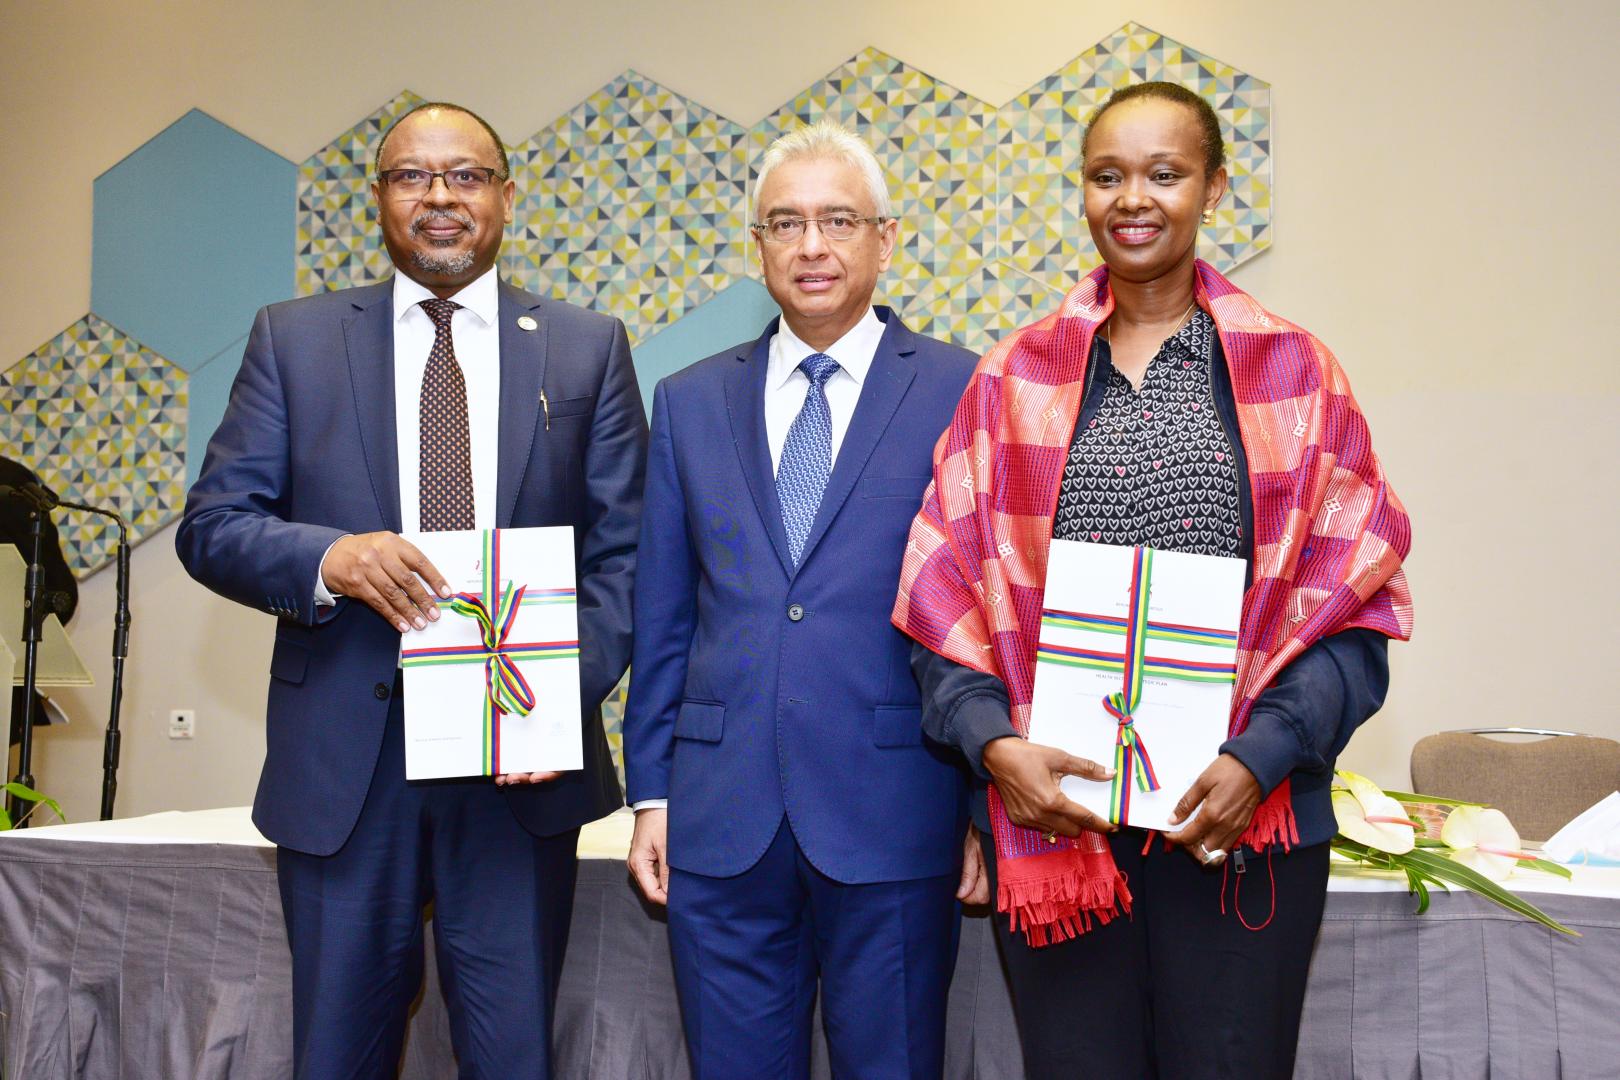 Dr Laurent Musango, WHO Representative in Mauritius, Hon. P. K. Jugnauth, Prime Minister of the Republic of Mauritius (centre) and Mrs Christine Umutoni, UN Resident Coordinator during the launching of the Health Sector Strategic Plan 2020-2024 